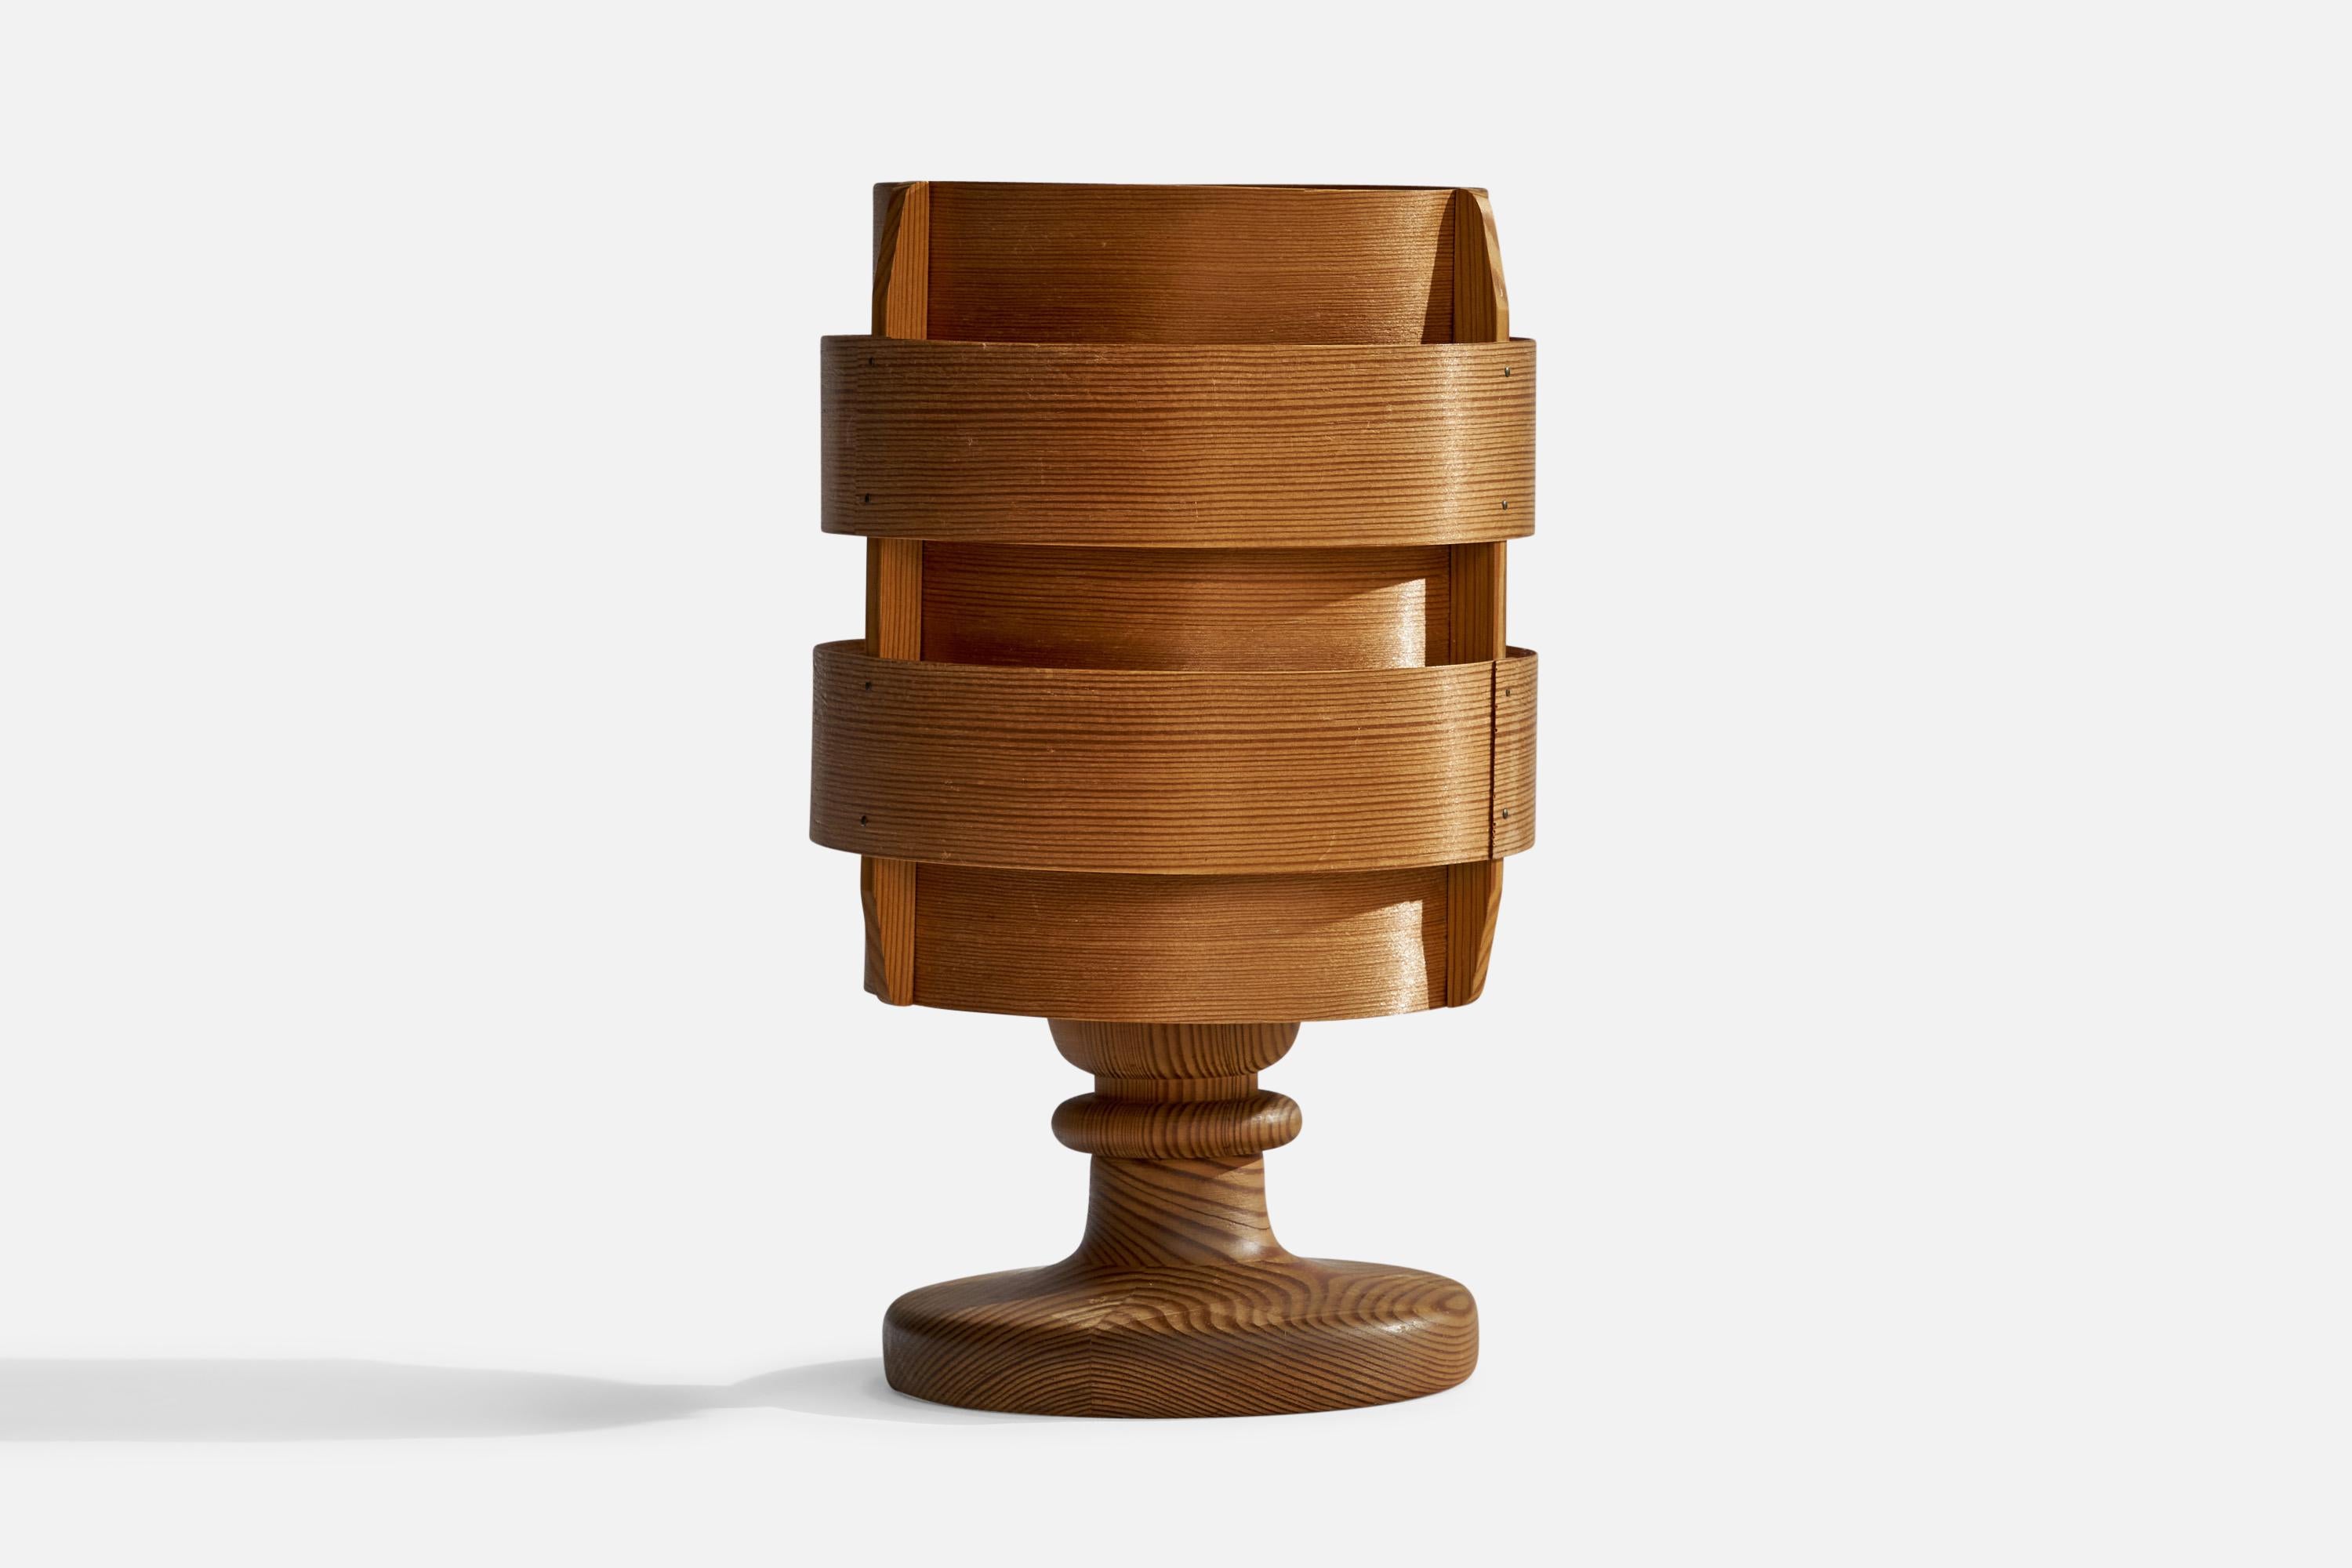 A pine and moulded pine veneer table lamp designed by Hans-Agne Jakobsson and produced by Elysett, Markaryd, Sweden, 1970s.

Overall Dimensions (inches): 10” H x 6” D
Stated dimensions include shade.
Bulb Specifications: E-26 Bulb
Number of Sockets: